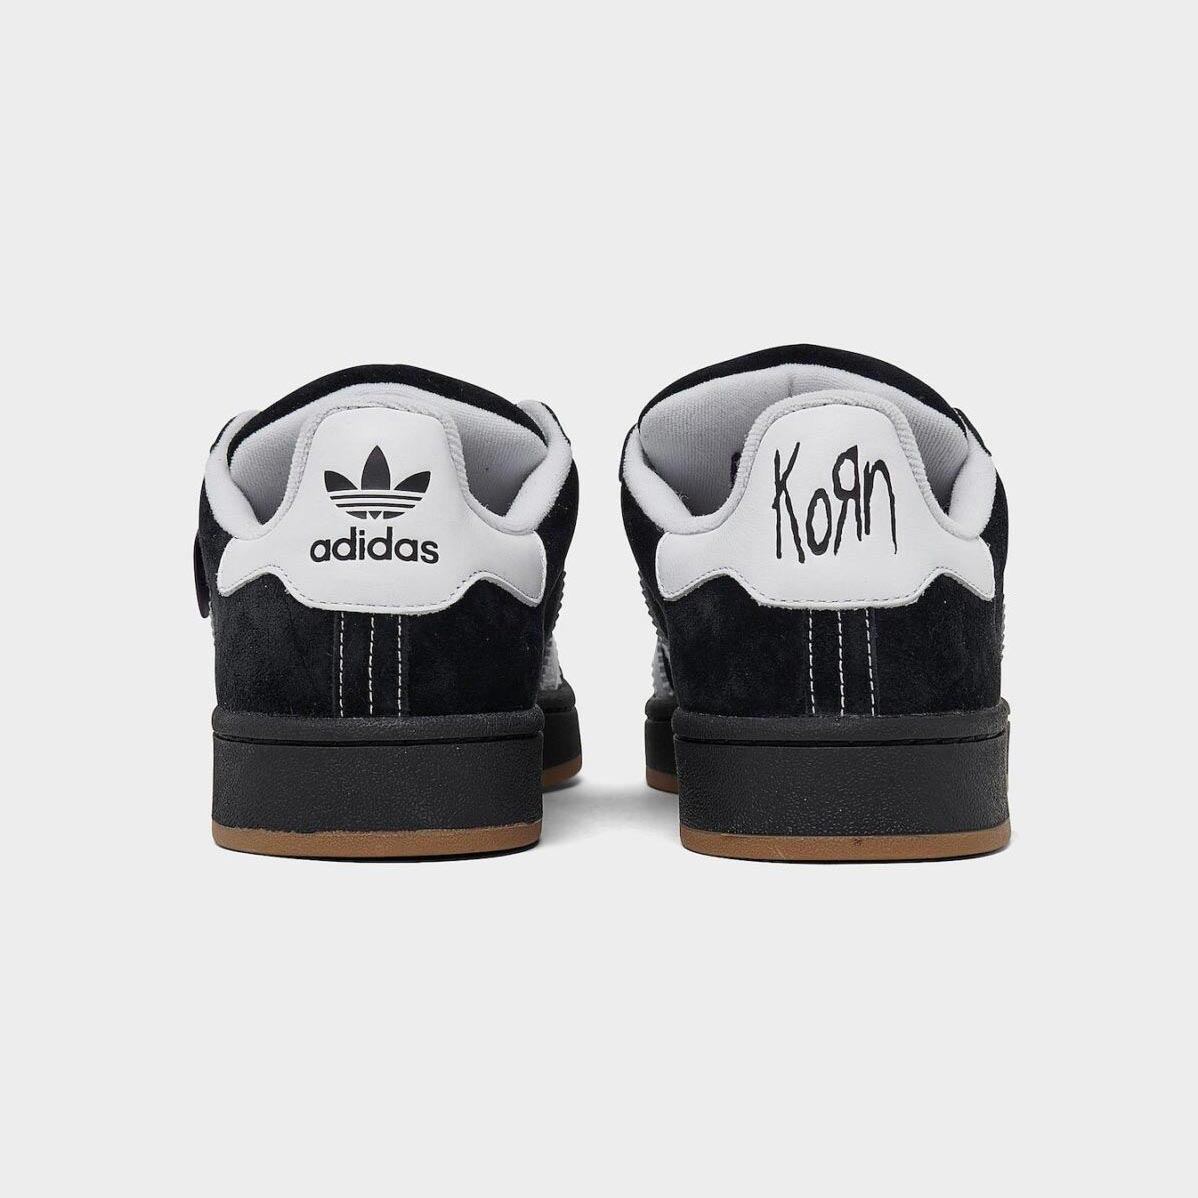 The Korn x Adidas Campus 00s Releases October 27